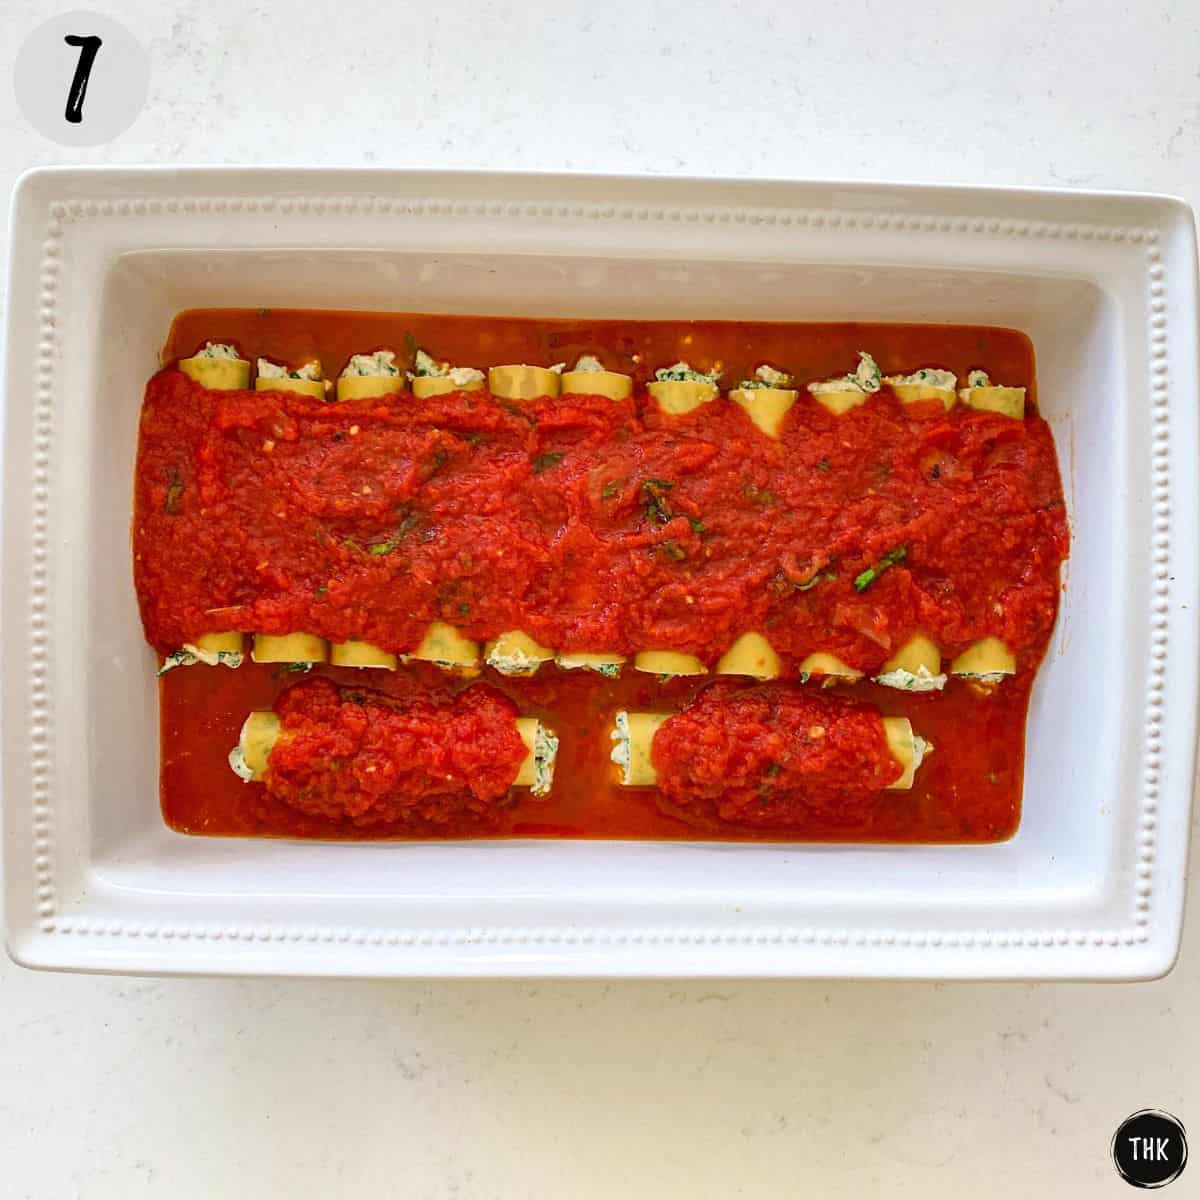 Cannelloni in baking dish covered in tomato sauce.